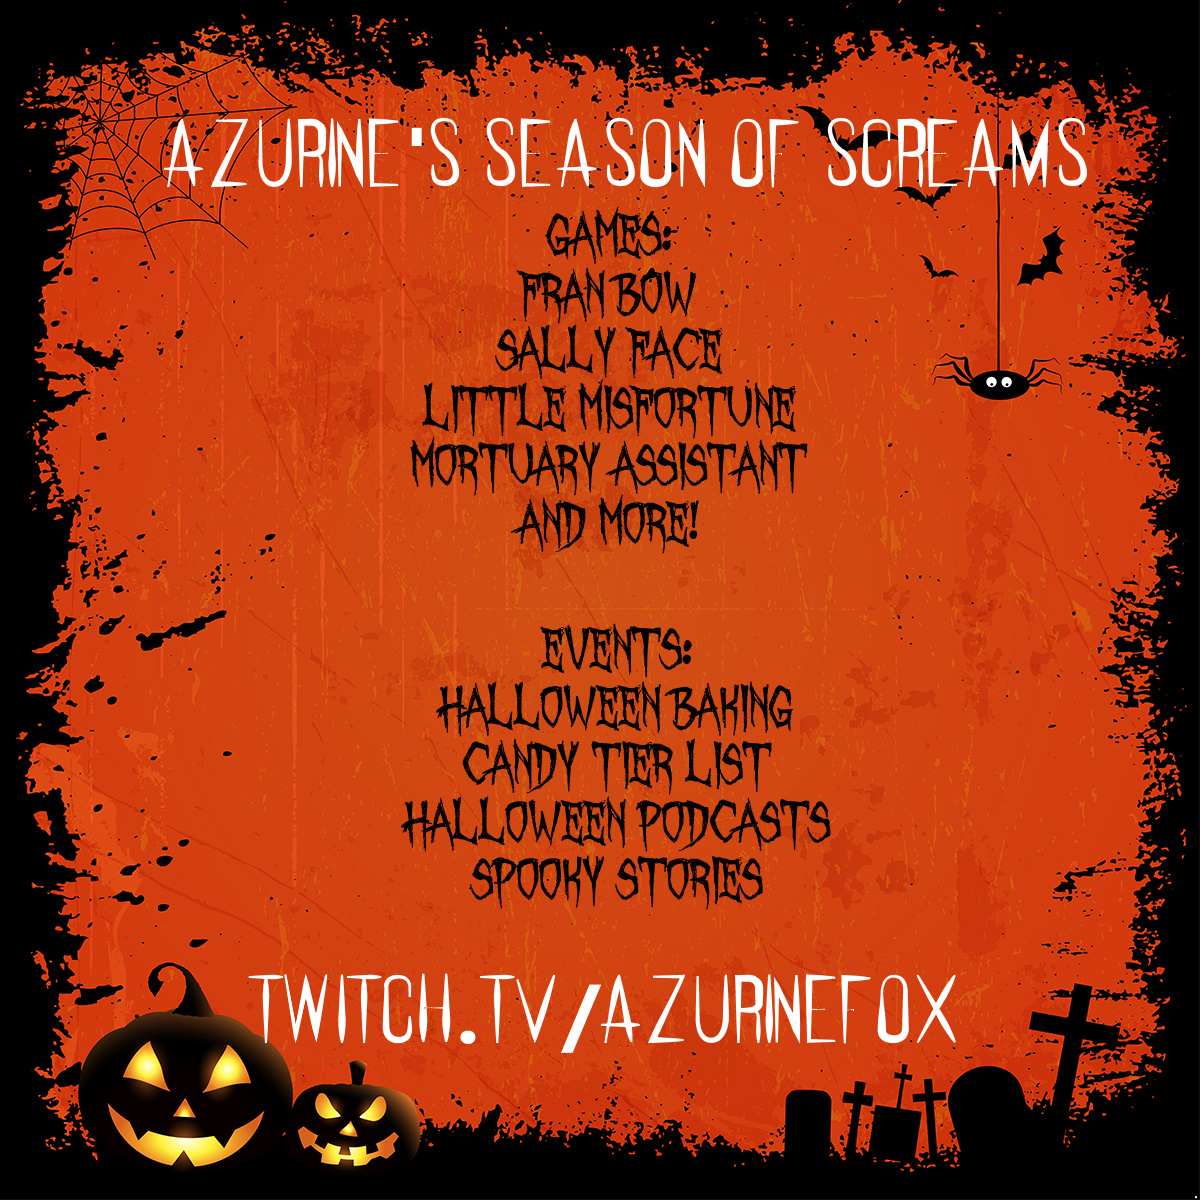 YOU GUYS SHOULD TUNE INTO THESE!!!

#Halloween2023 #streamer #twitch #seasonofscreams #franbow #littlemisfortune #sallyface #mortuaryassistant